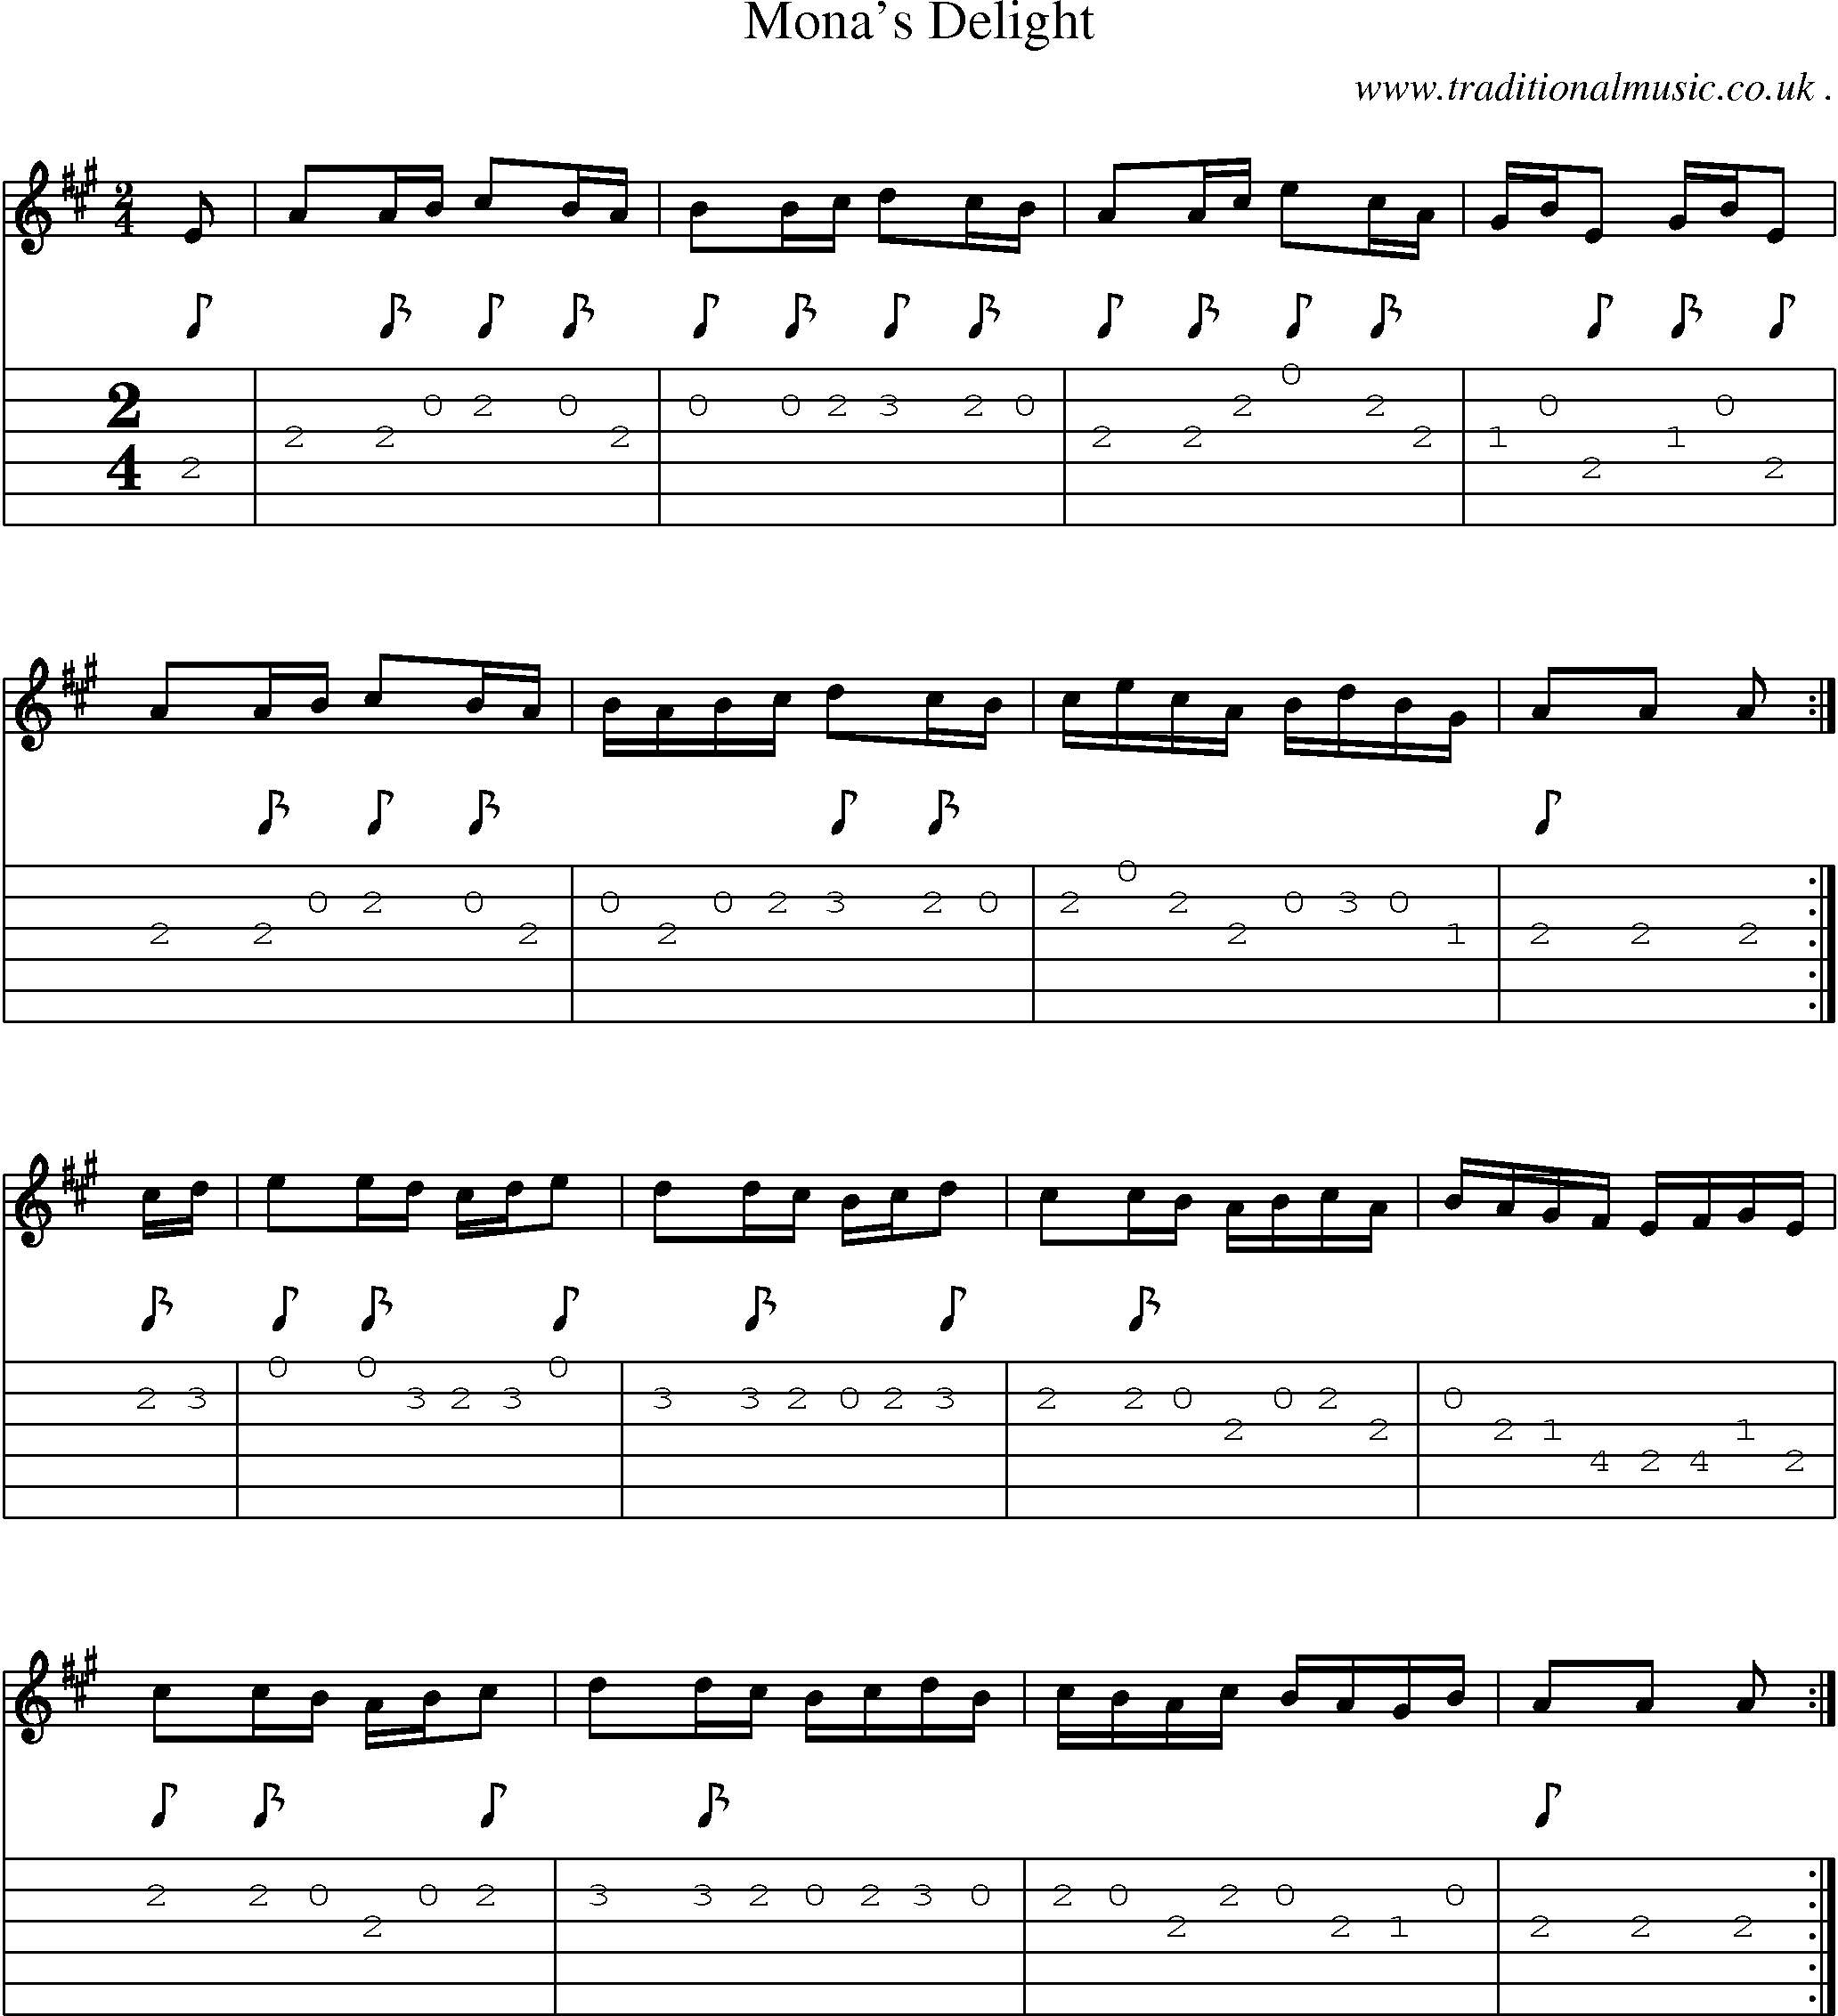 Sheet-music  score, Chords and Guitar Tabs for Monas Delight